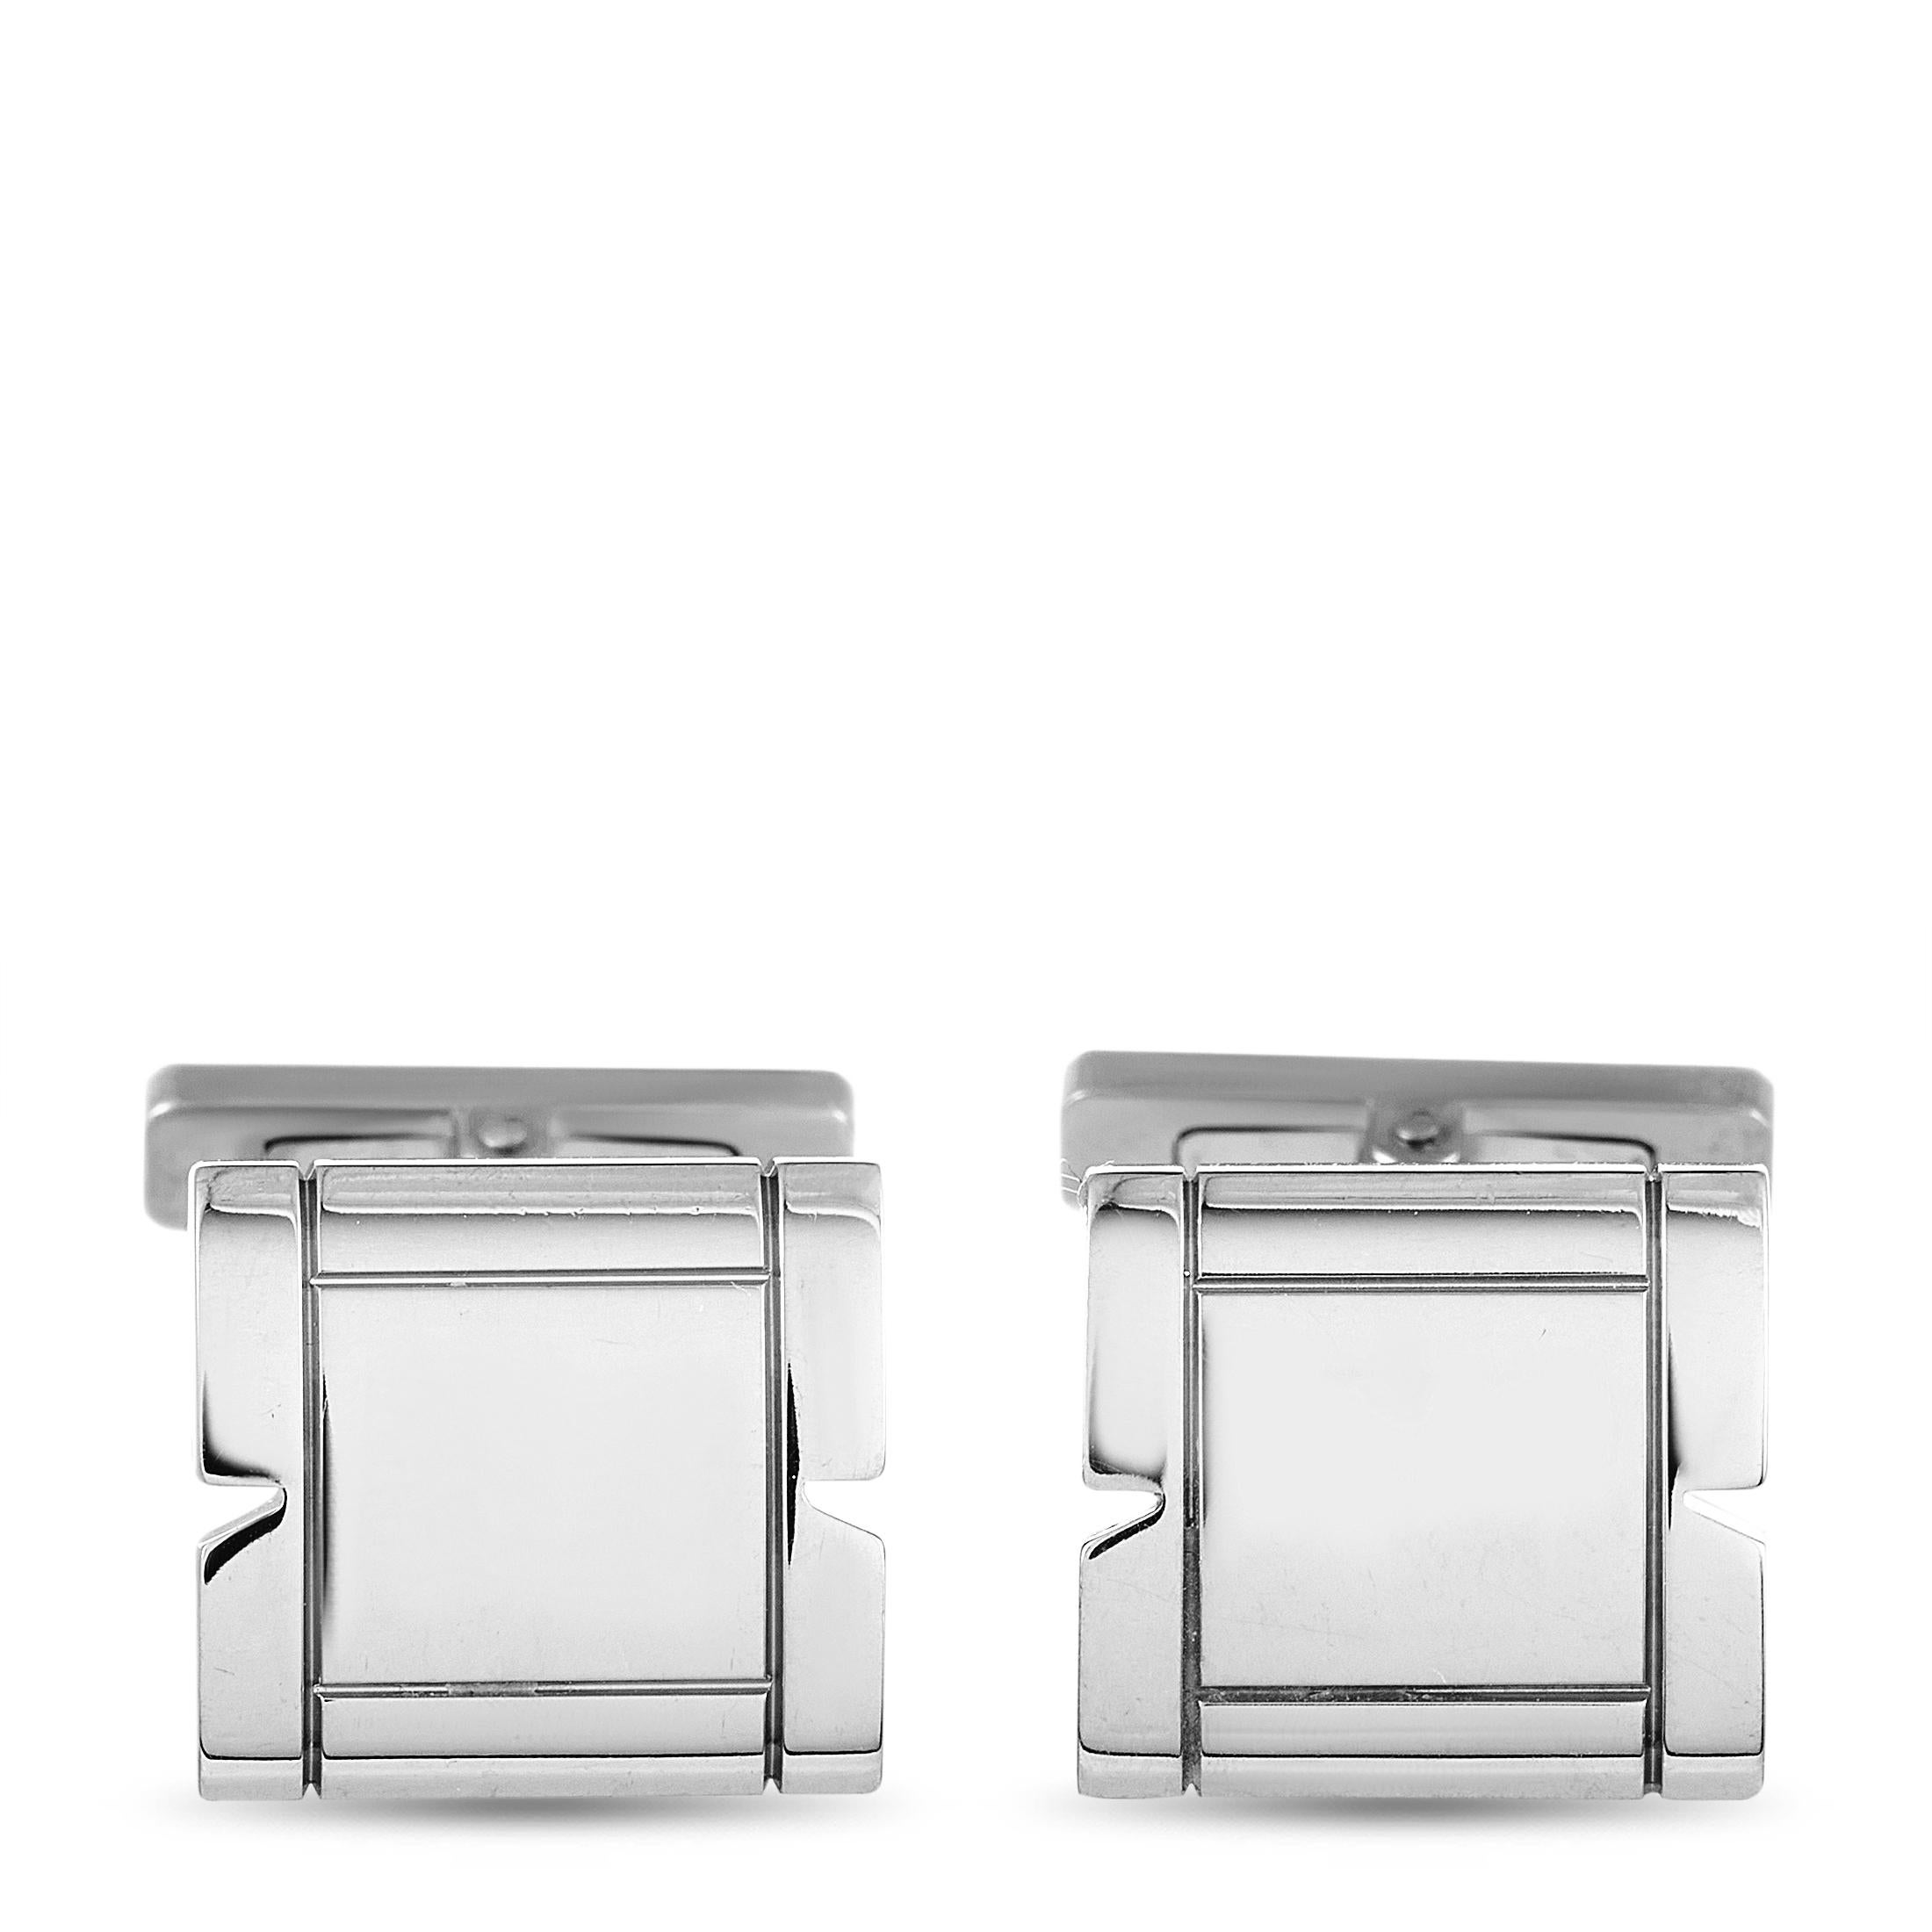 These Cartier cufflinks are made of 18K white gold and each of the two weighs 11.1 grams. The cufflinks measure 0.80” in length and 0.50” in width.

The pair is offered in estate condition and includes a gift box.